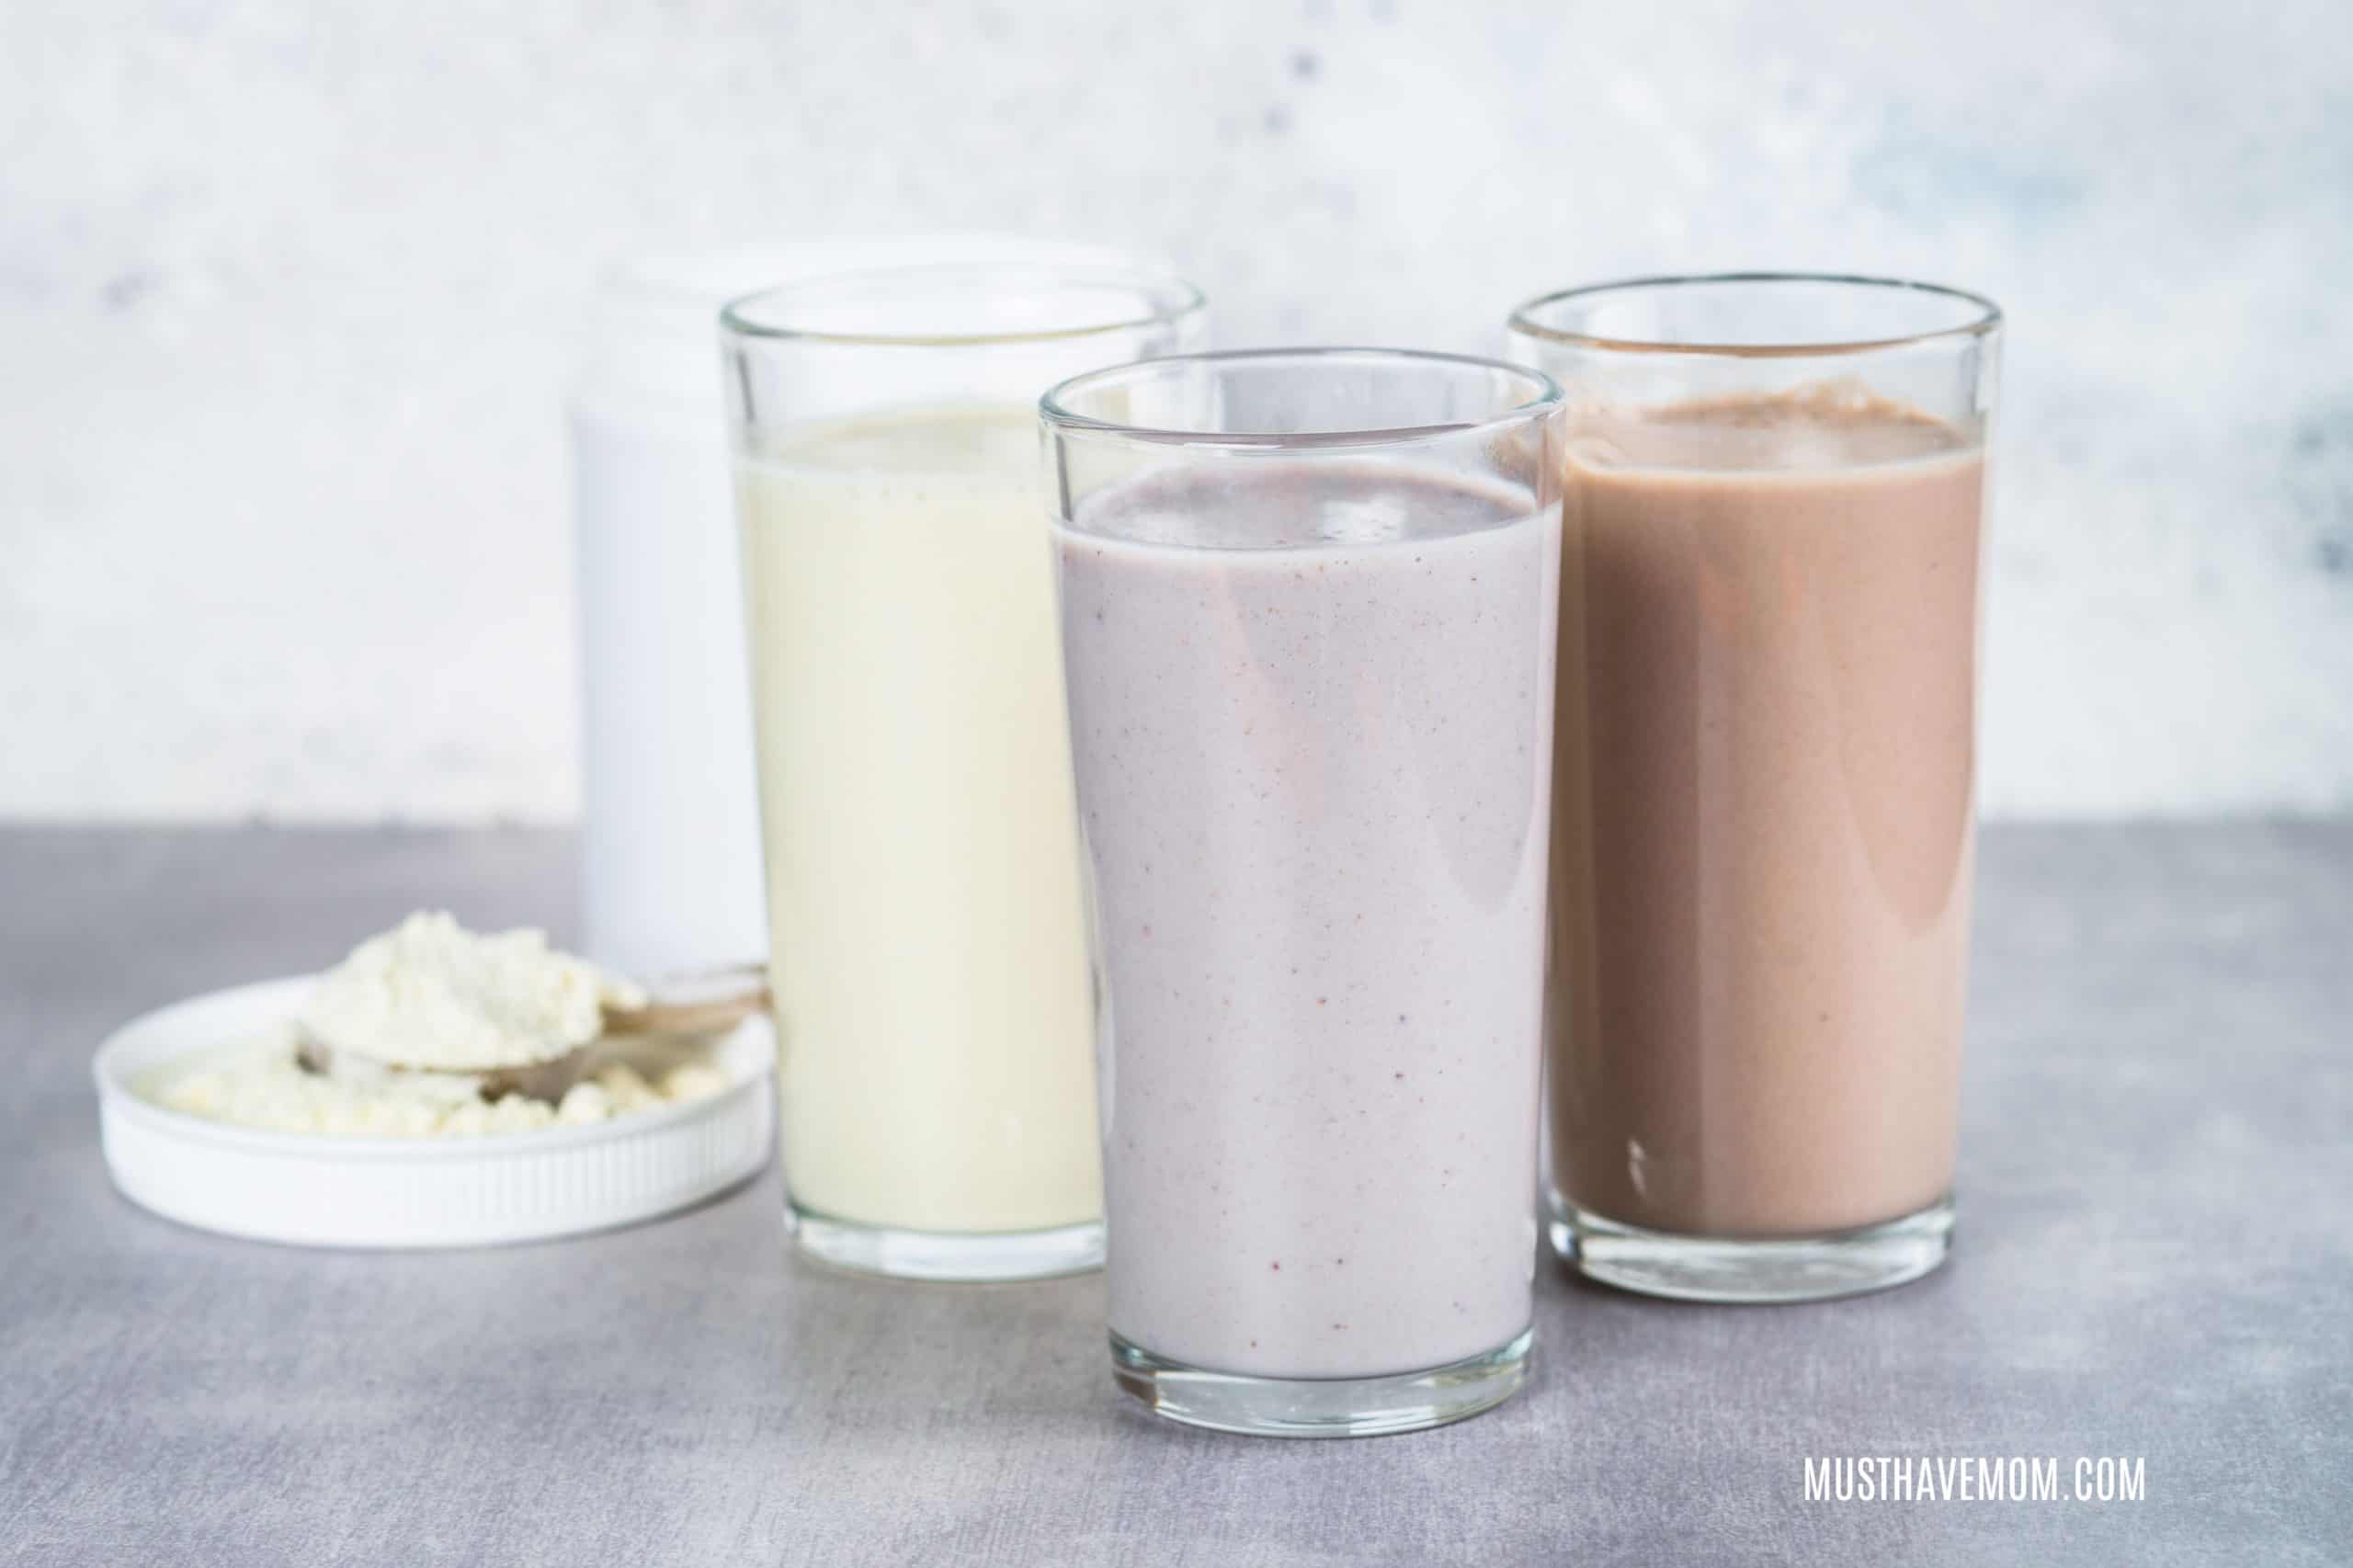 Vega One Vs Shakeology: Which One Is Better?